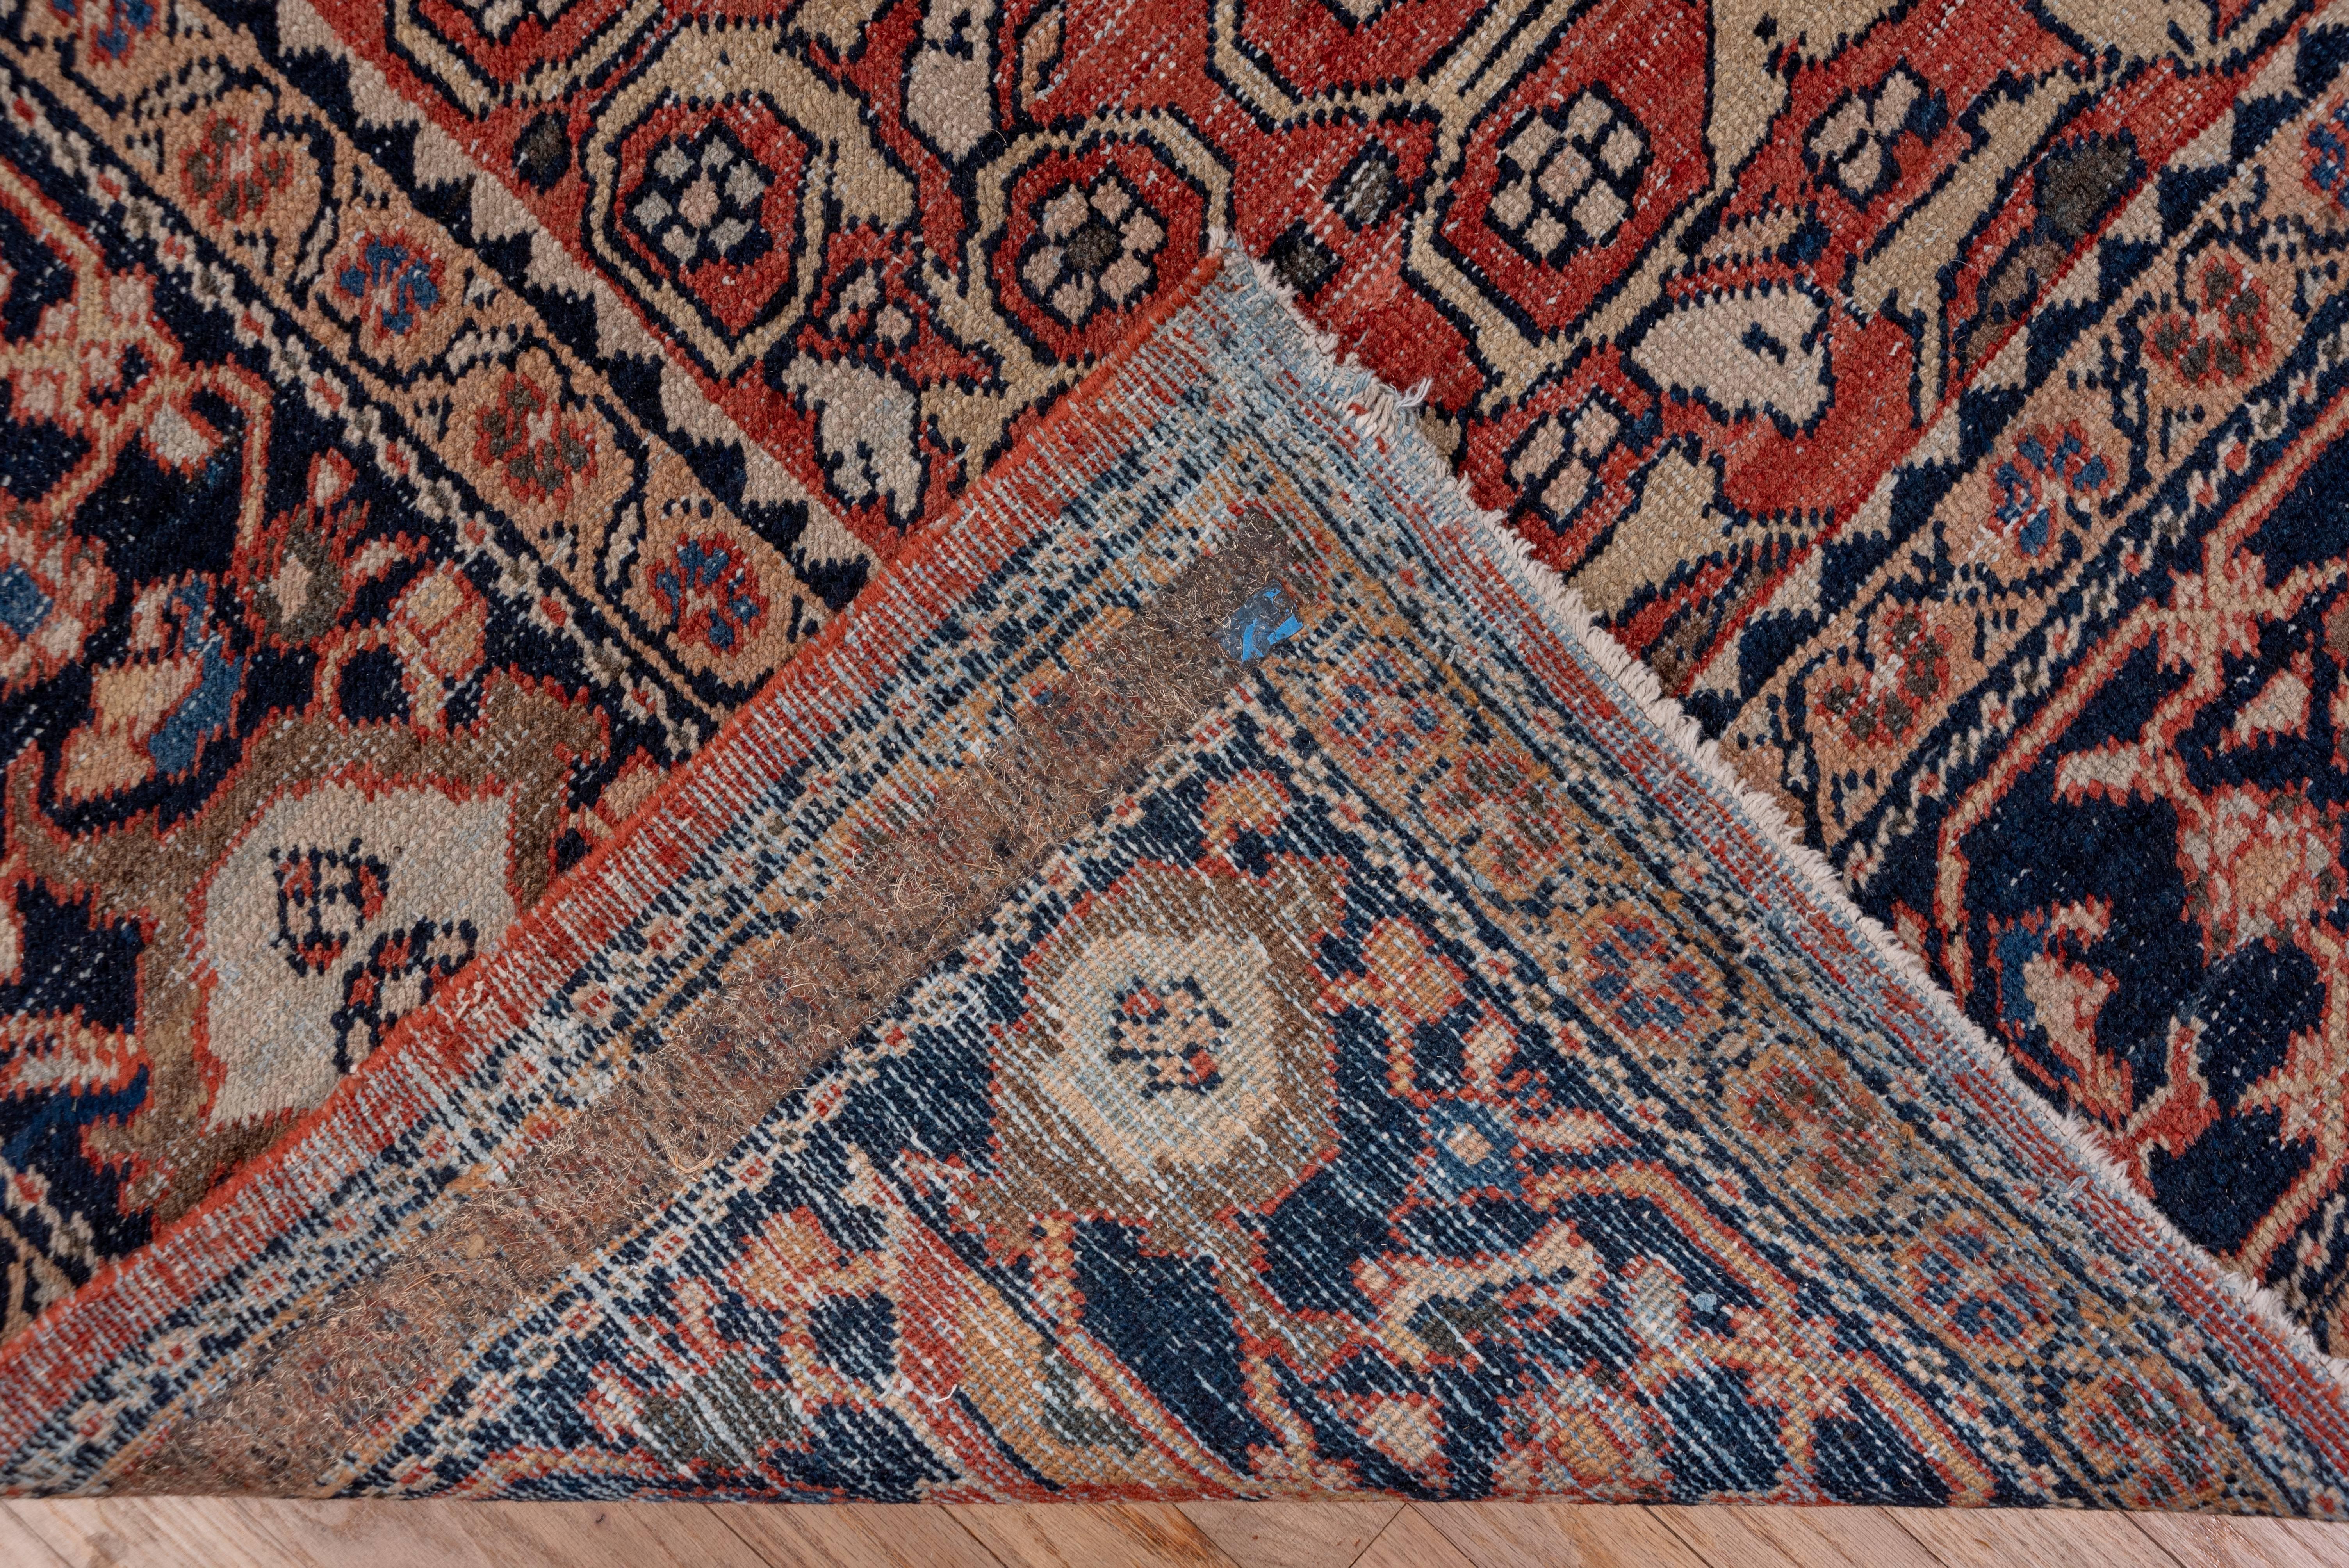 The soft madder field of this west Persian village carpet displays a repeating design of eccentric vines in straight and enclosed circular styles, accented by rosettes, in shades of straw and dark brown. The dark brown turtle palmette border